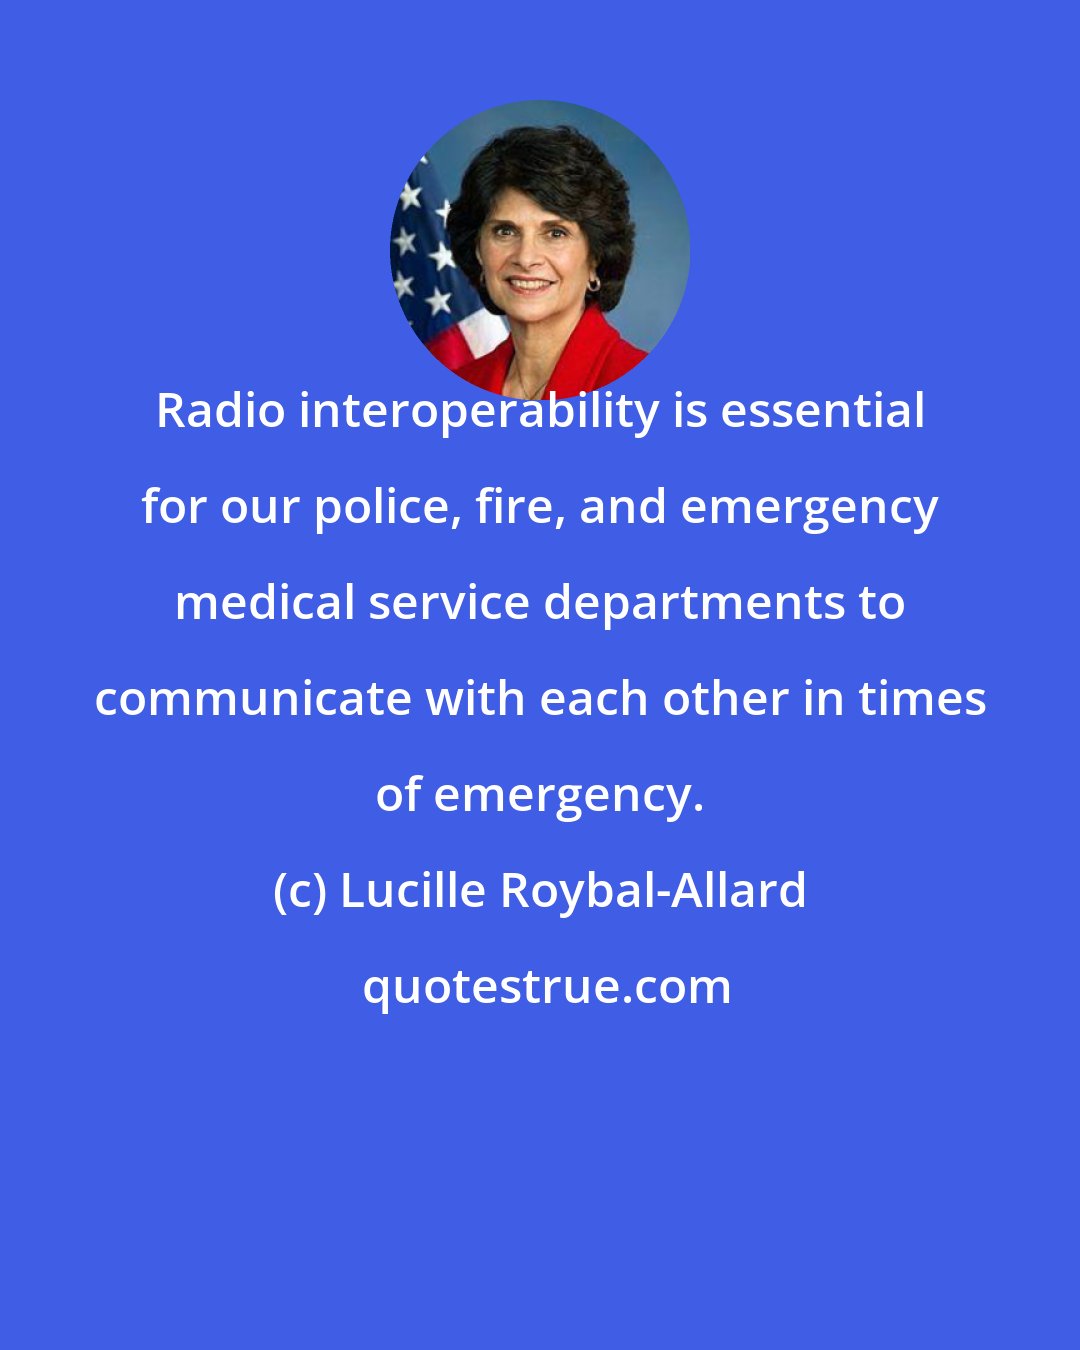 Lucille Roybal-Allard: Radio interoperability is essential for our police, fire, and emergency medical service departments to communicate with each other in times of emergency.